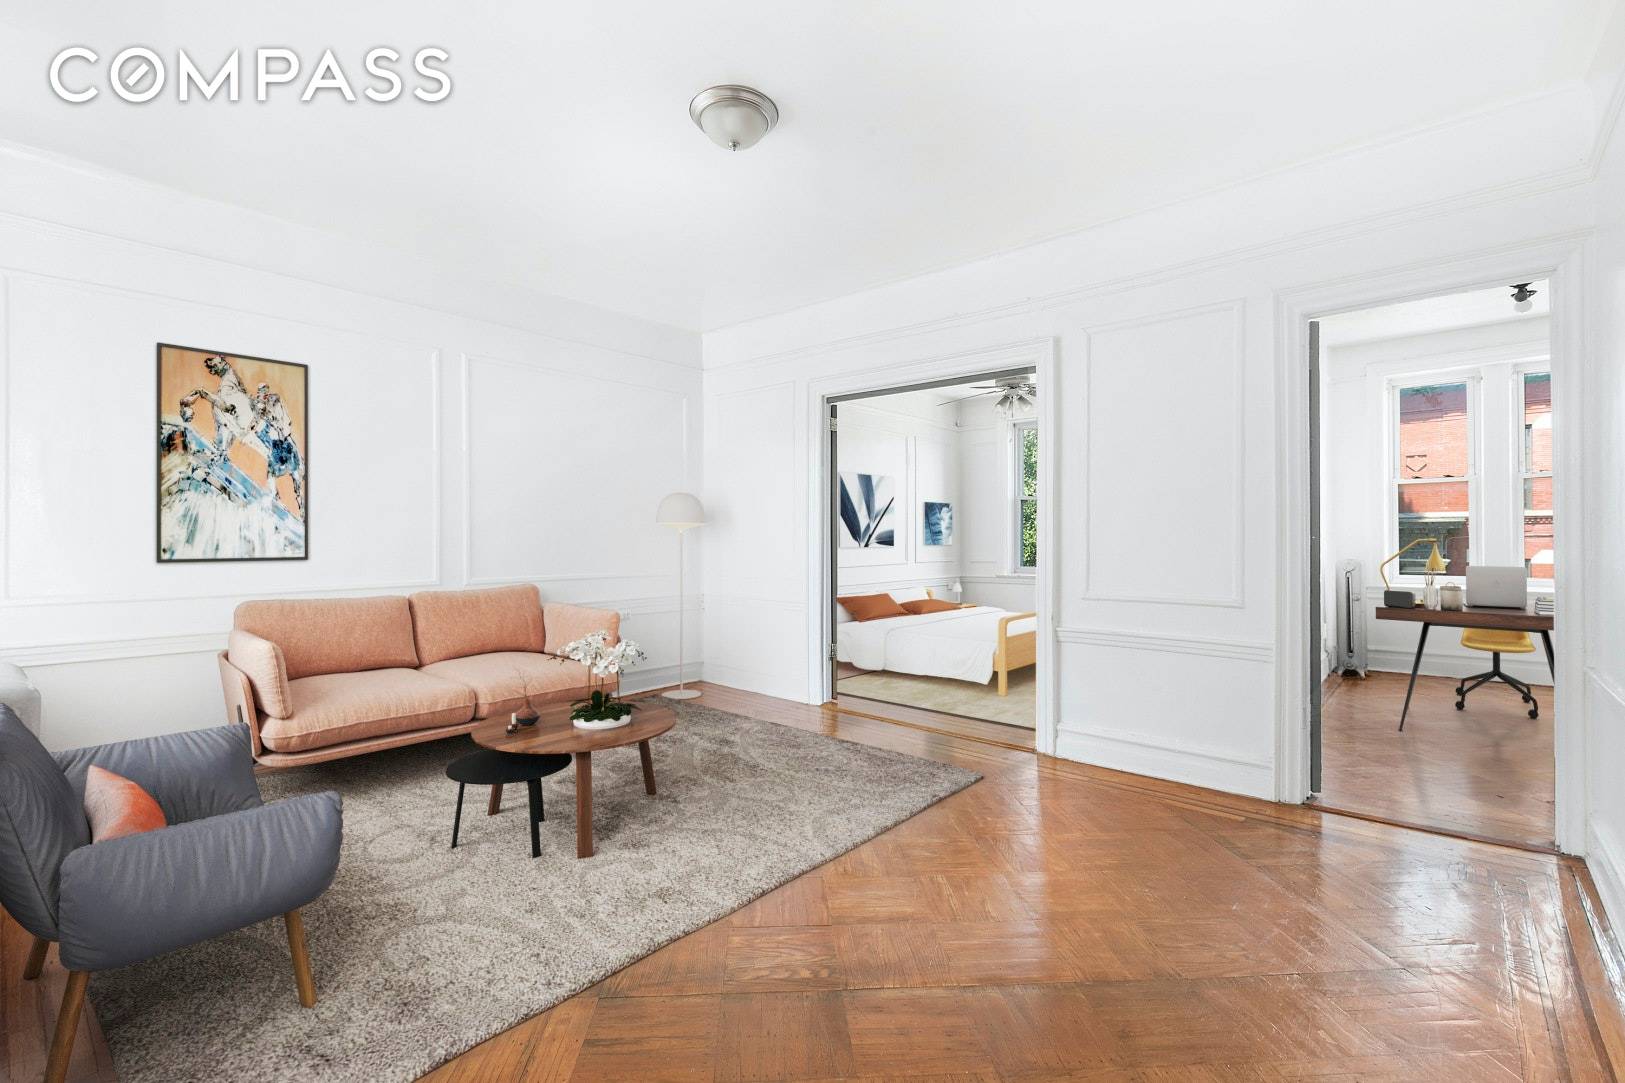 Beautiful and spacious 3 bed 1 bath apartment in charming townhouse on a beautiful block of Maple Street in Prospect Lefferts Gardens.